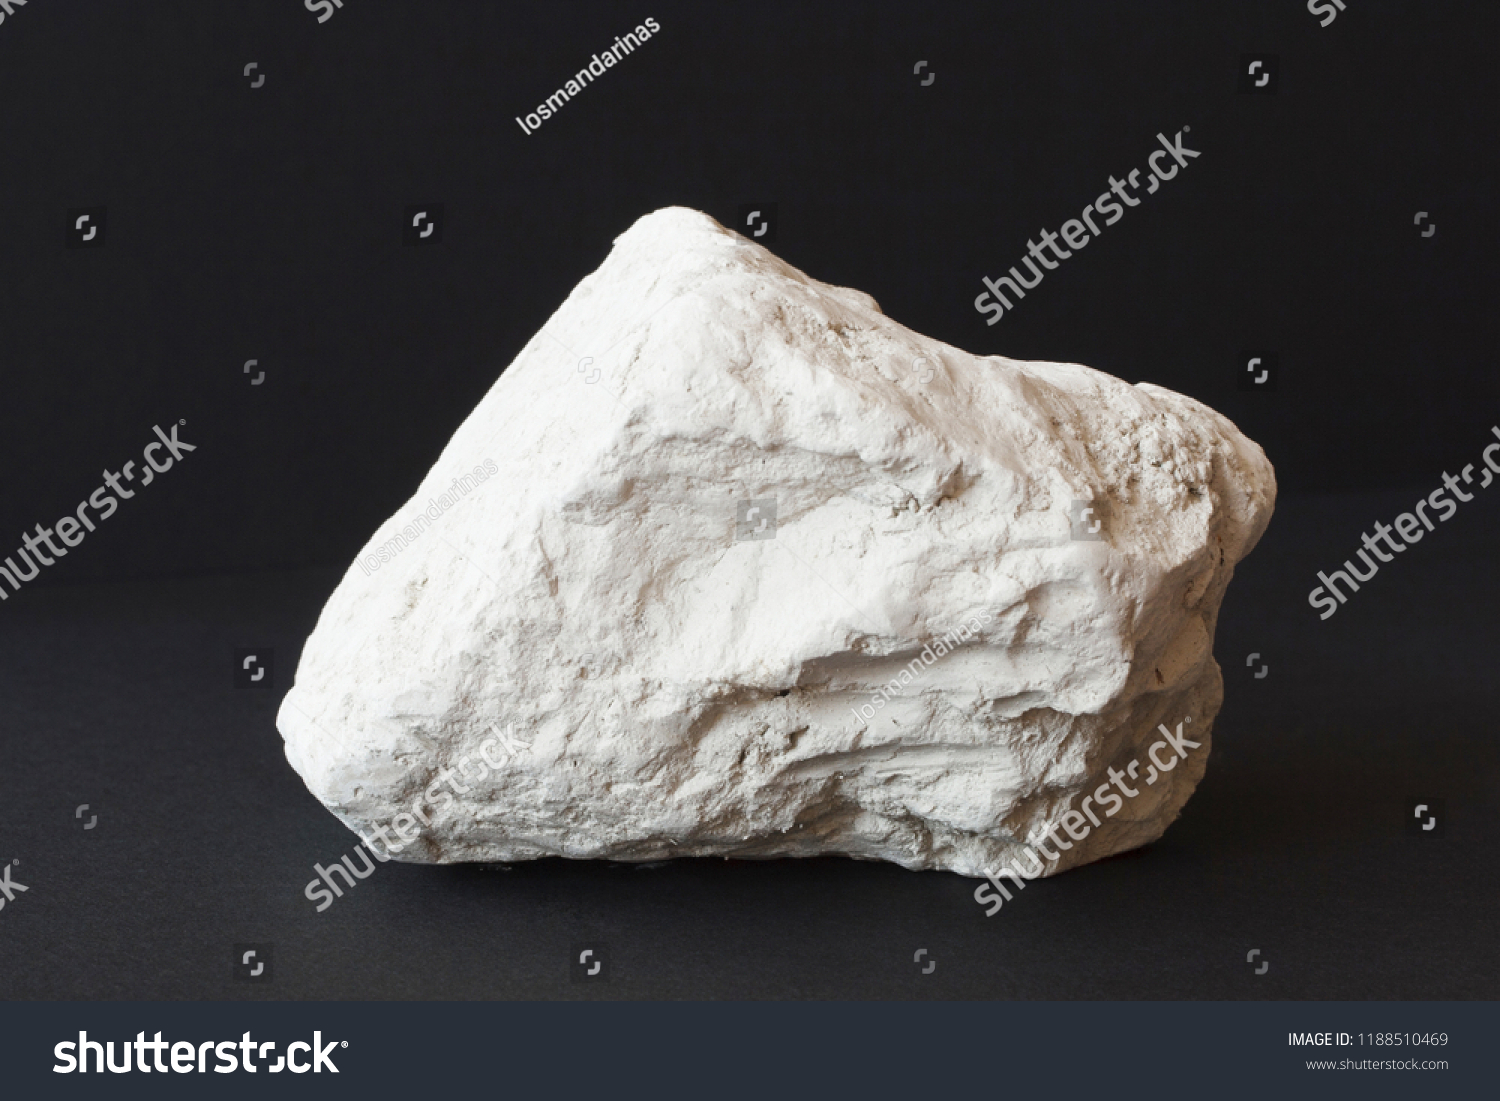 is chalk a rock or mineral